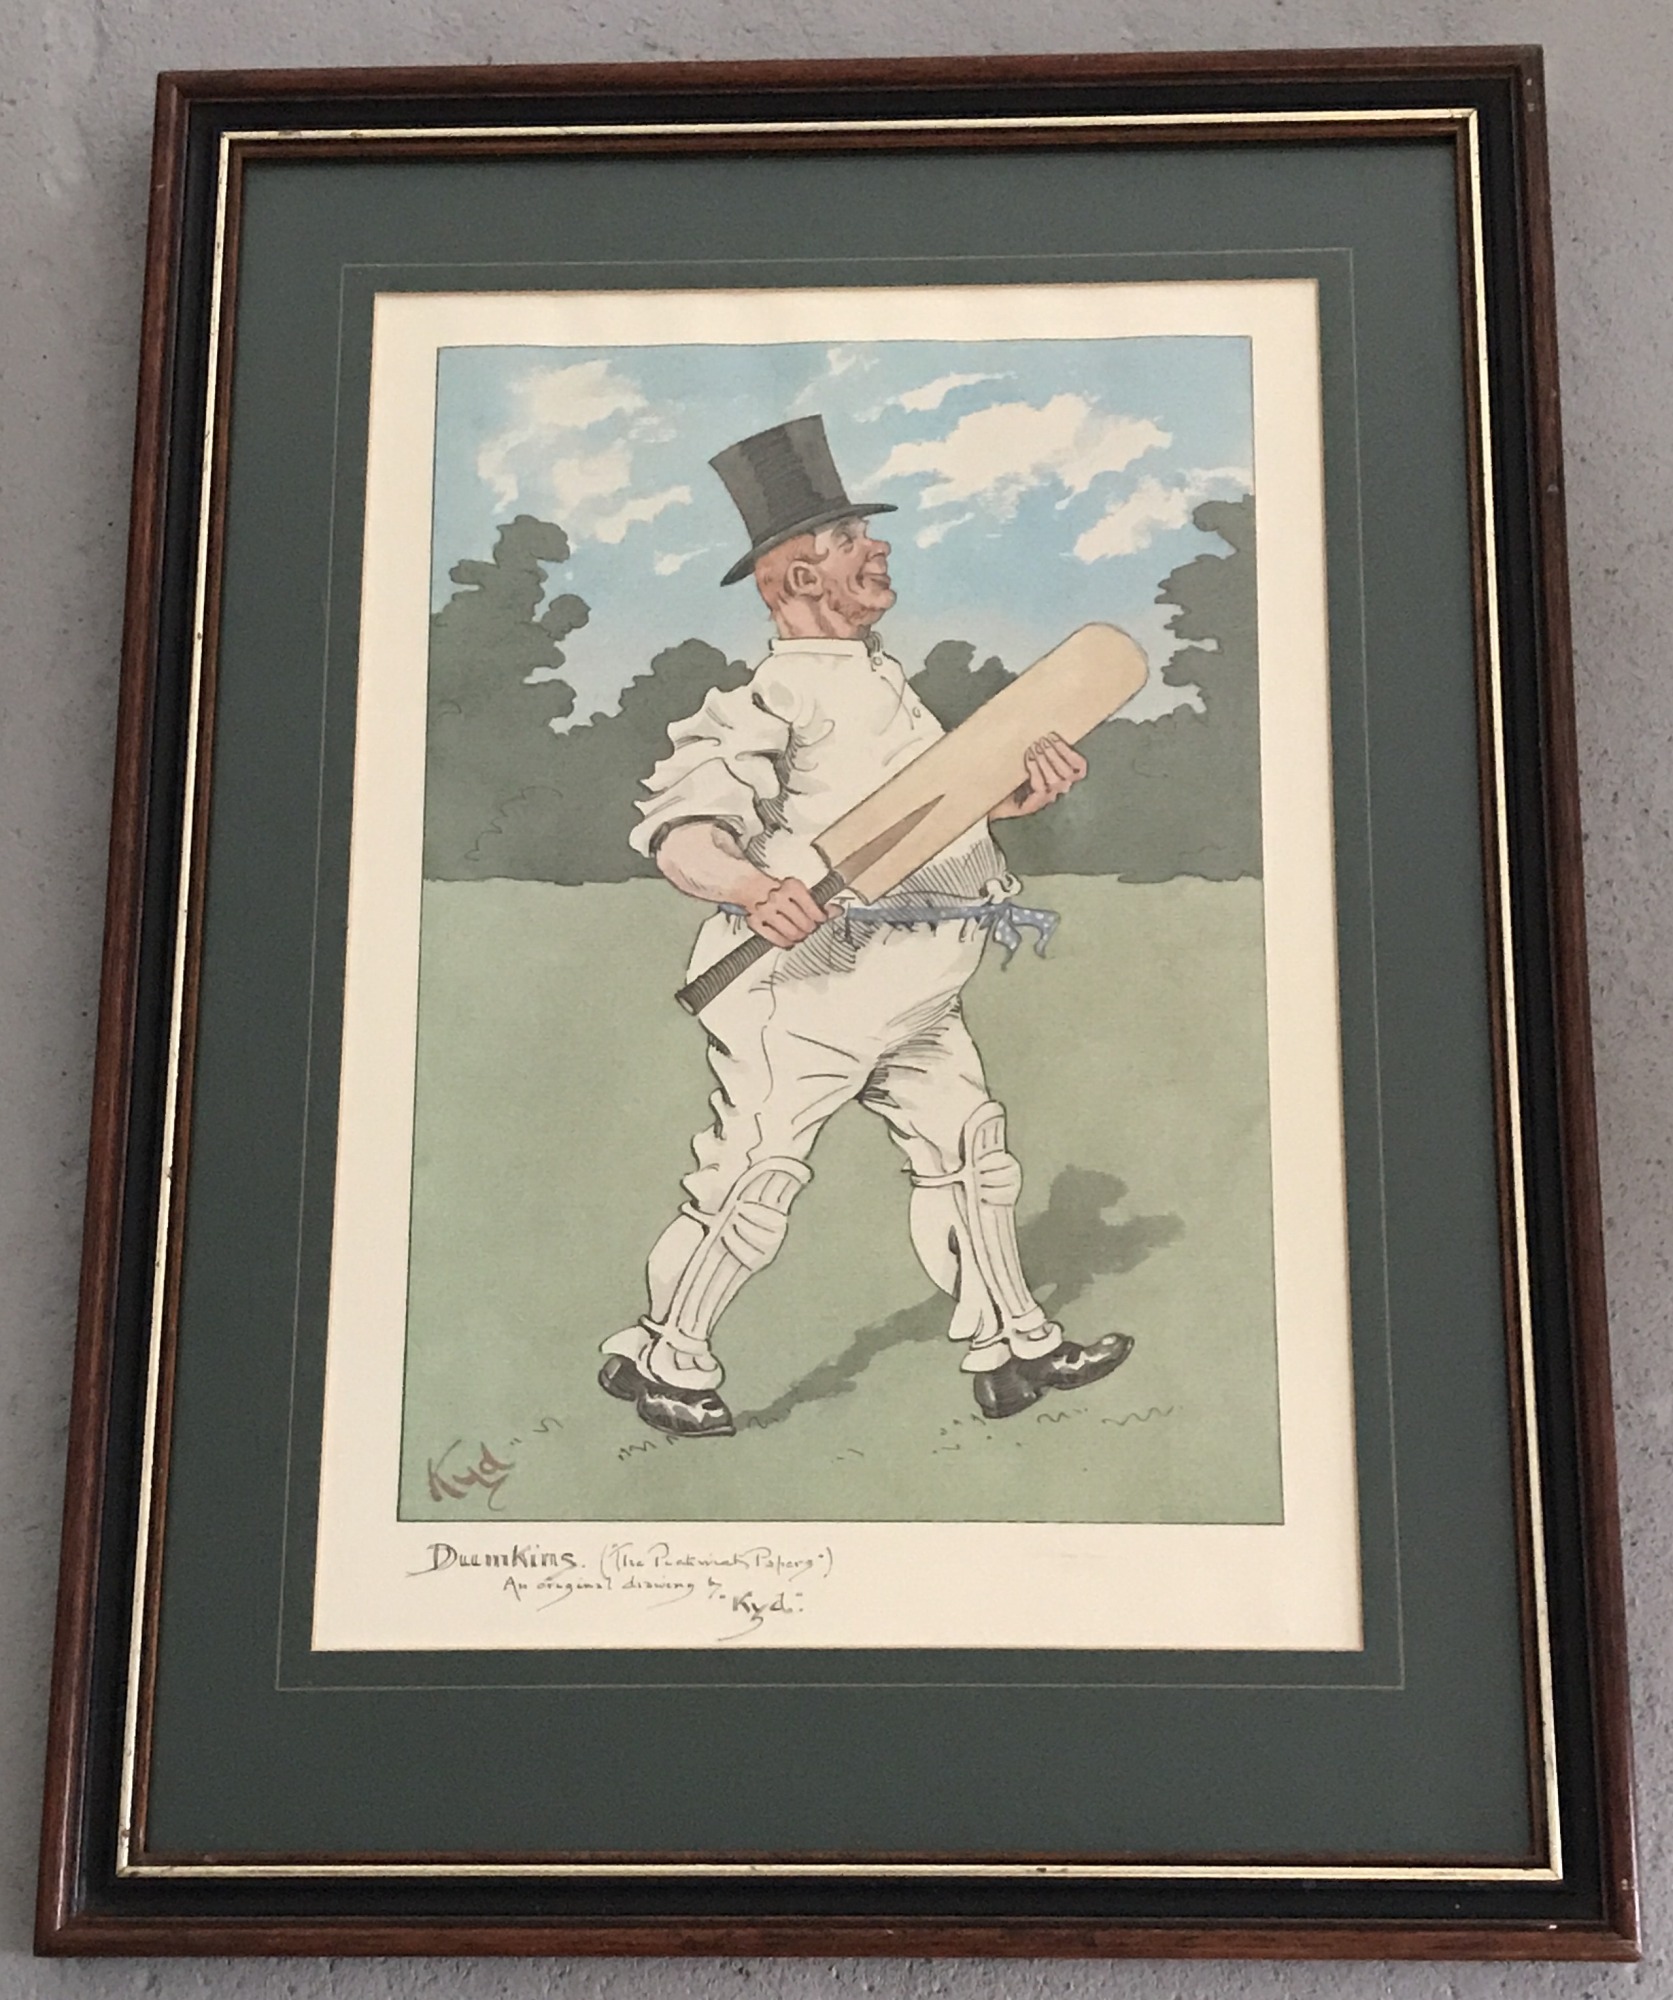 A print of "Dumkins" the batsman as taken from The Pickwick Papers. From an original drawing by Kyd.